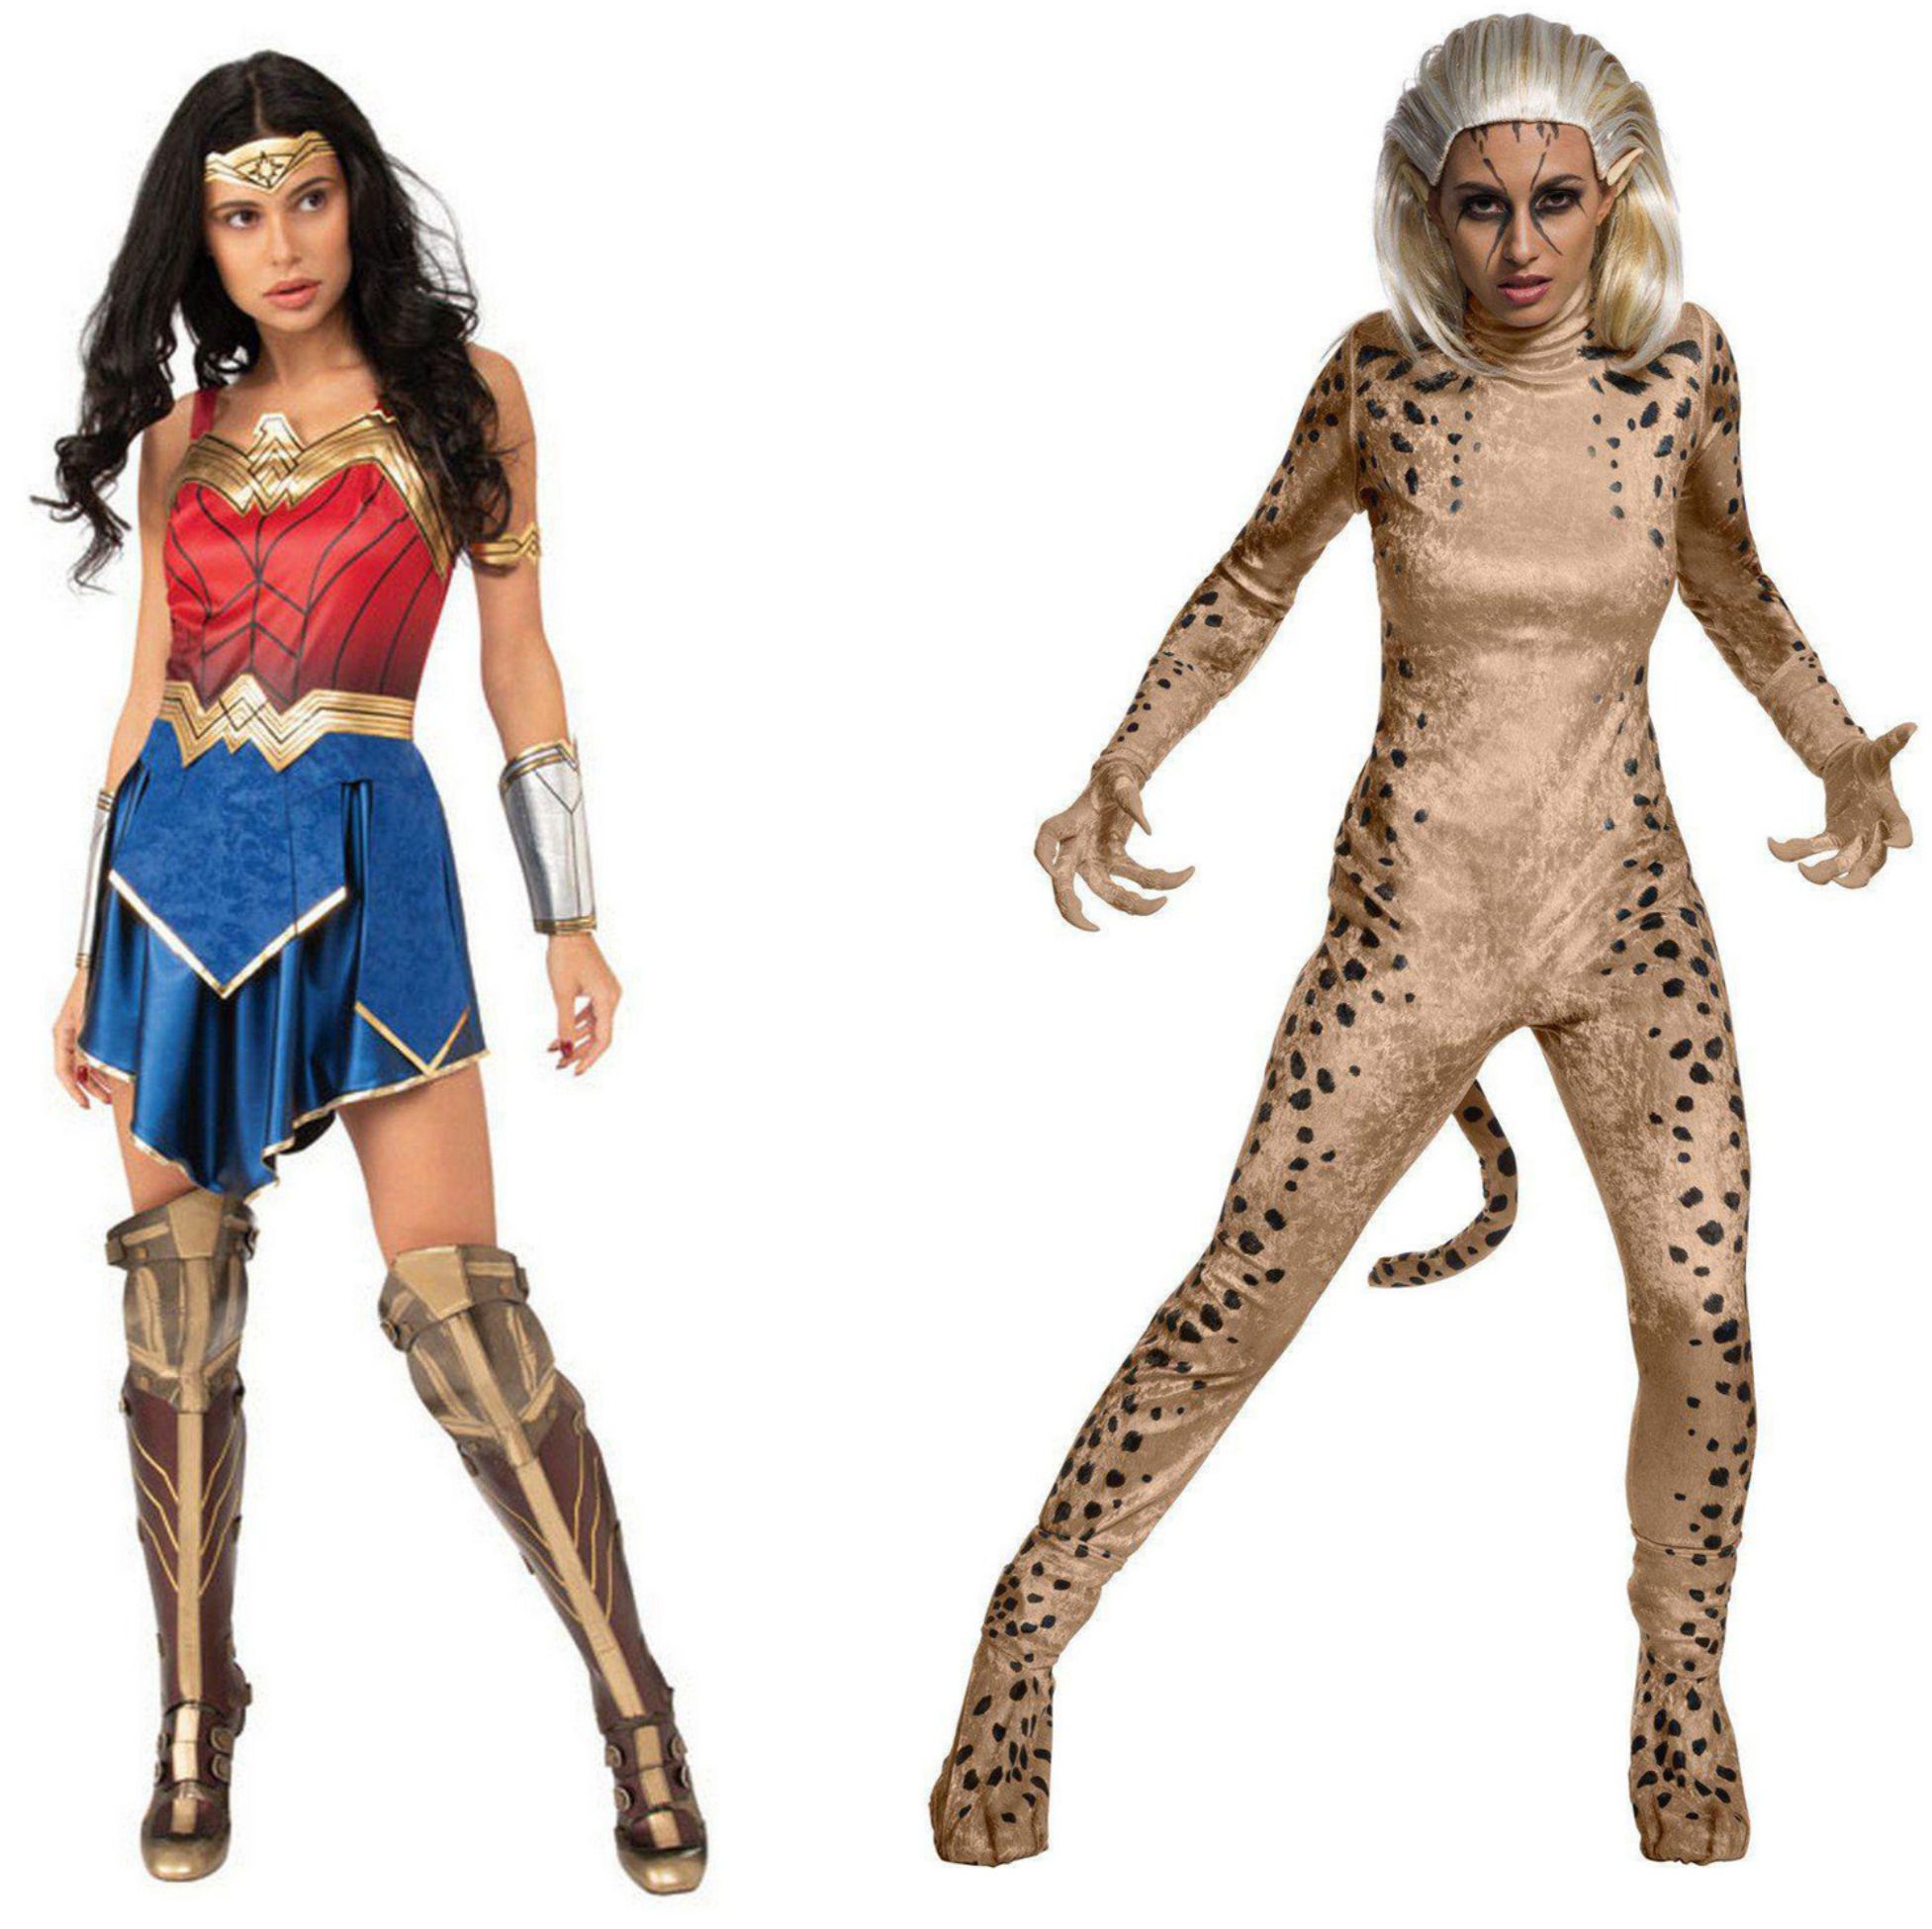 Cheetah's Final Form in Wonder Woman 1984 Teased by New Halloween Costumes